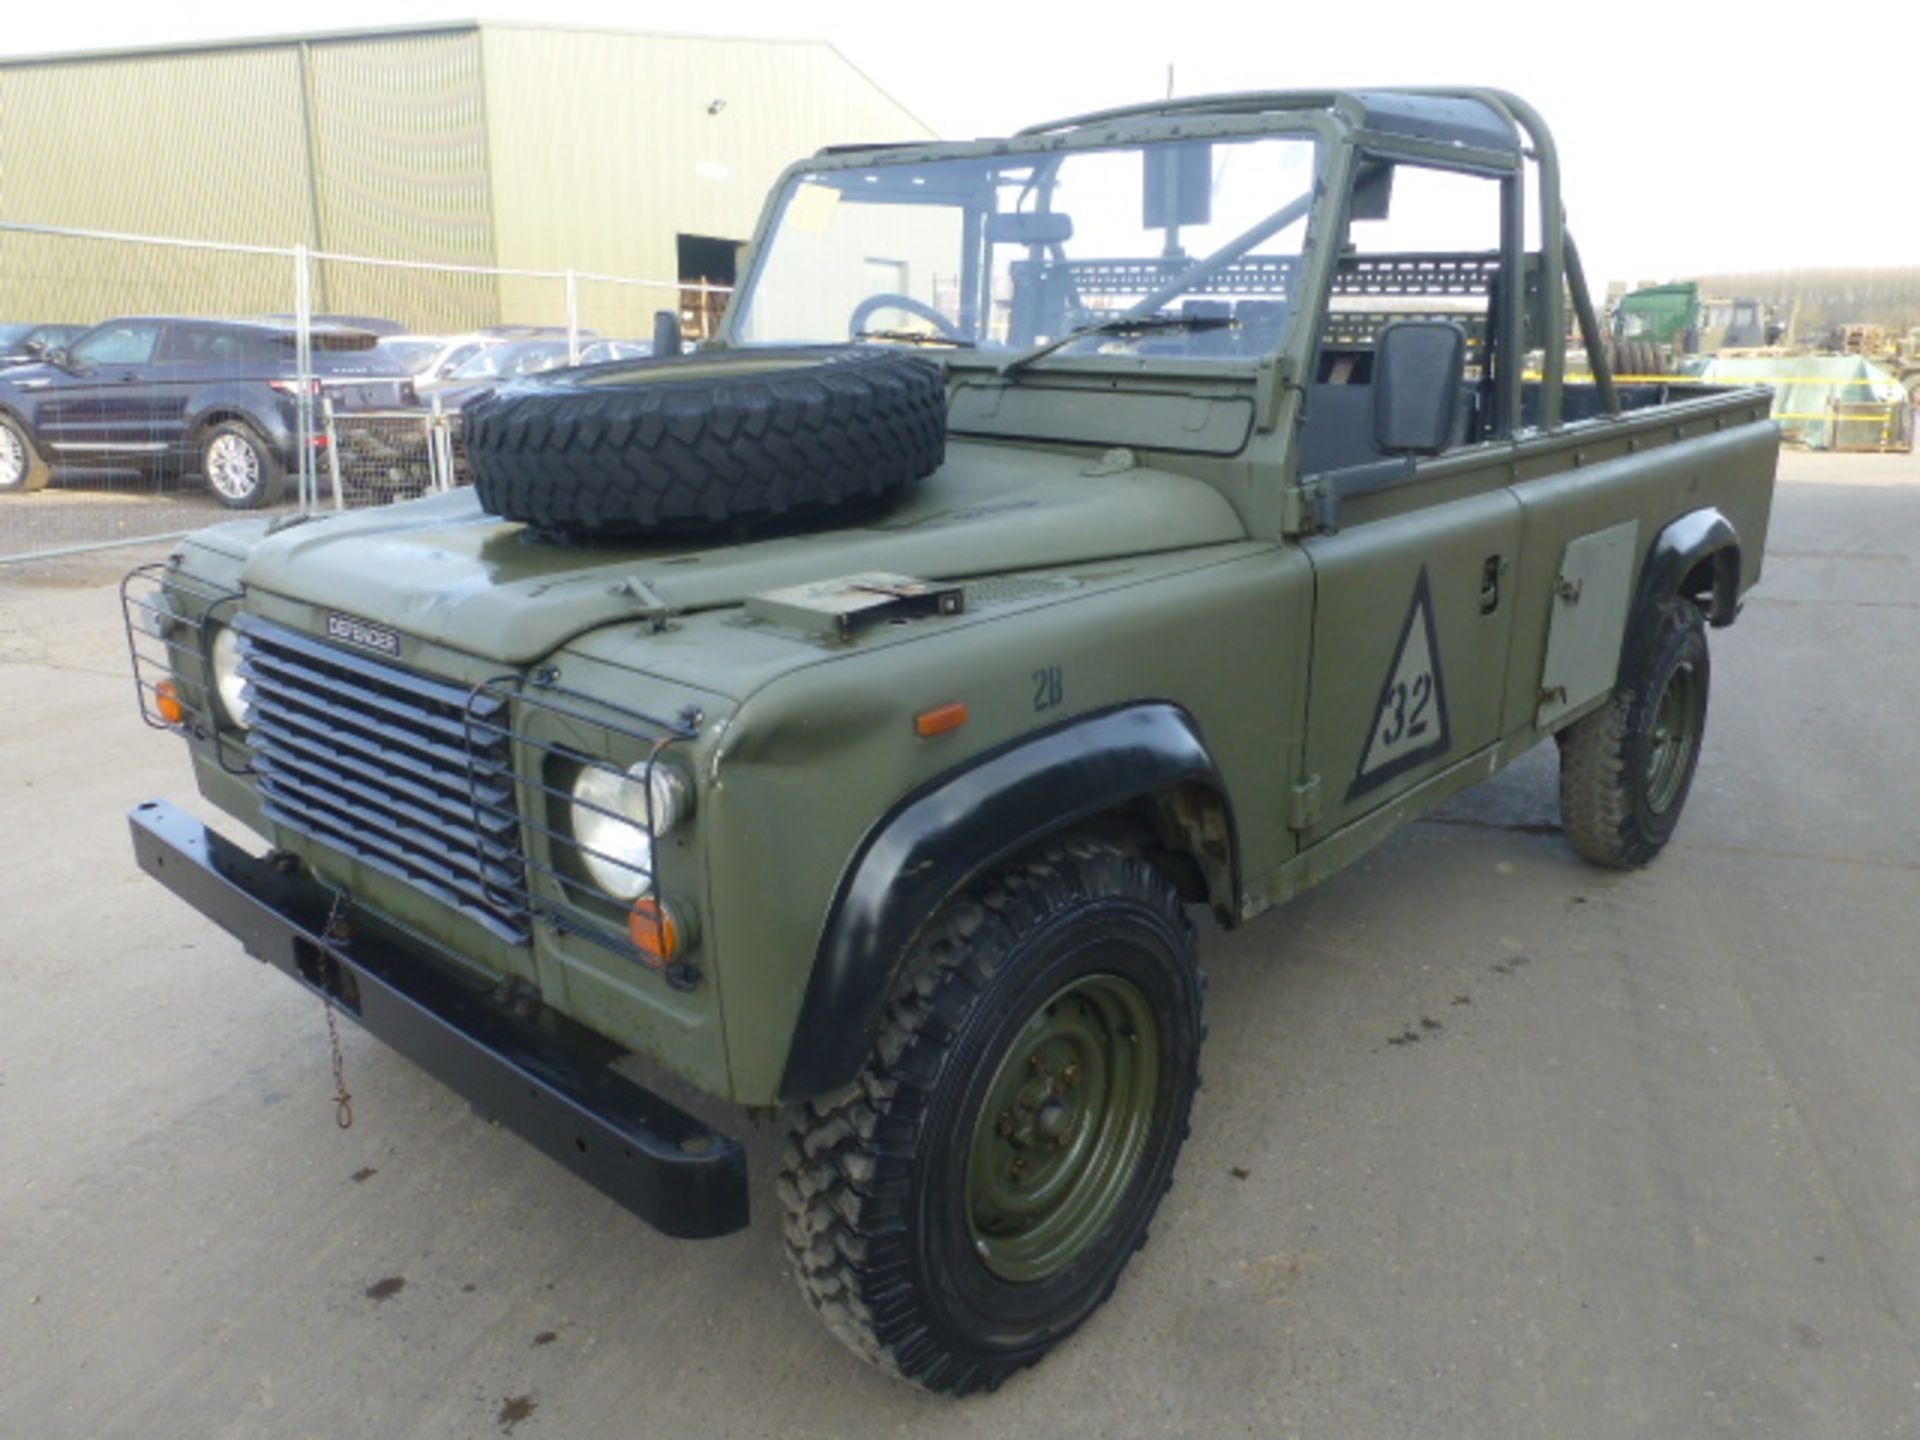 Reconnaissance Land Rover 110 Get Ready For Summer! - Image 3 of 15